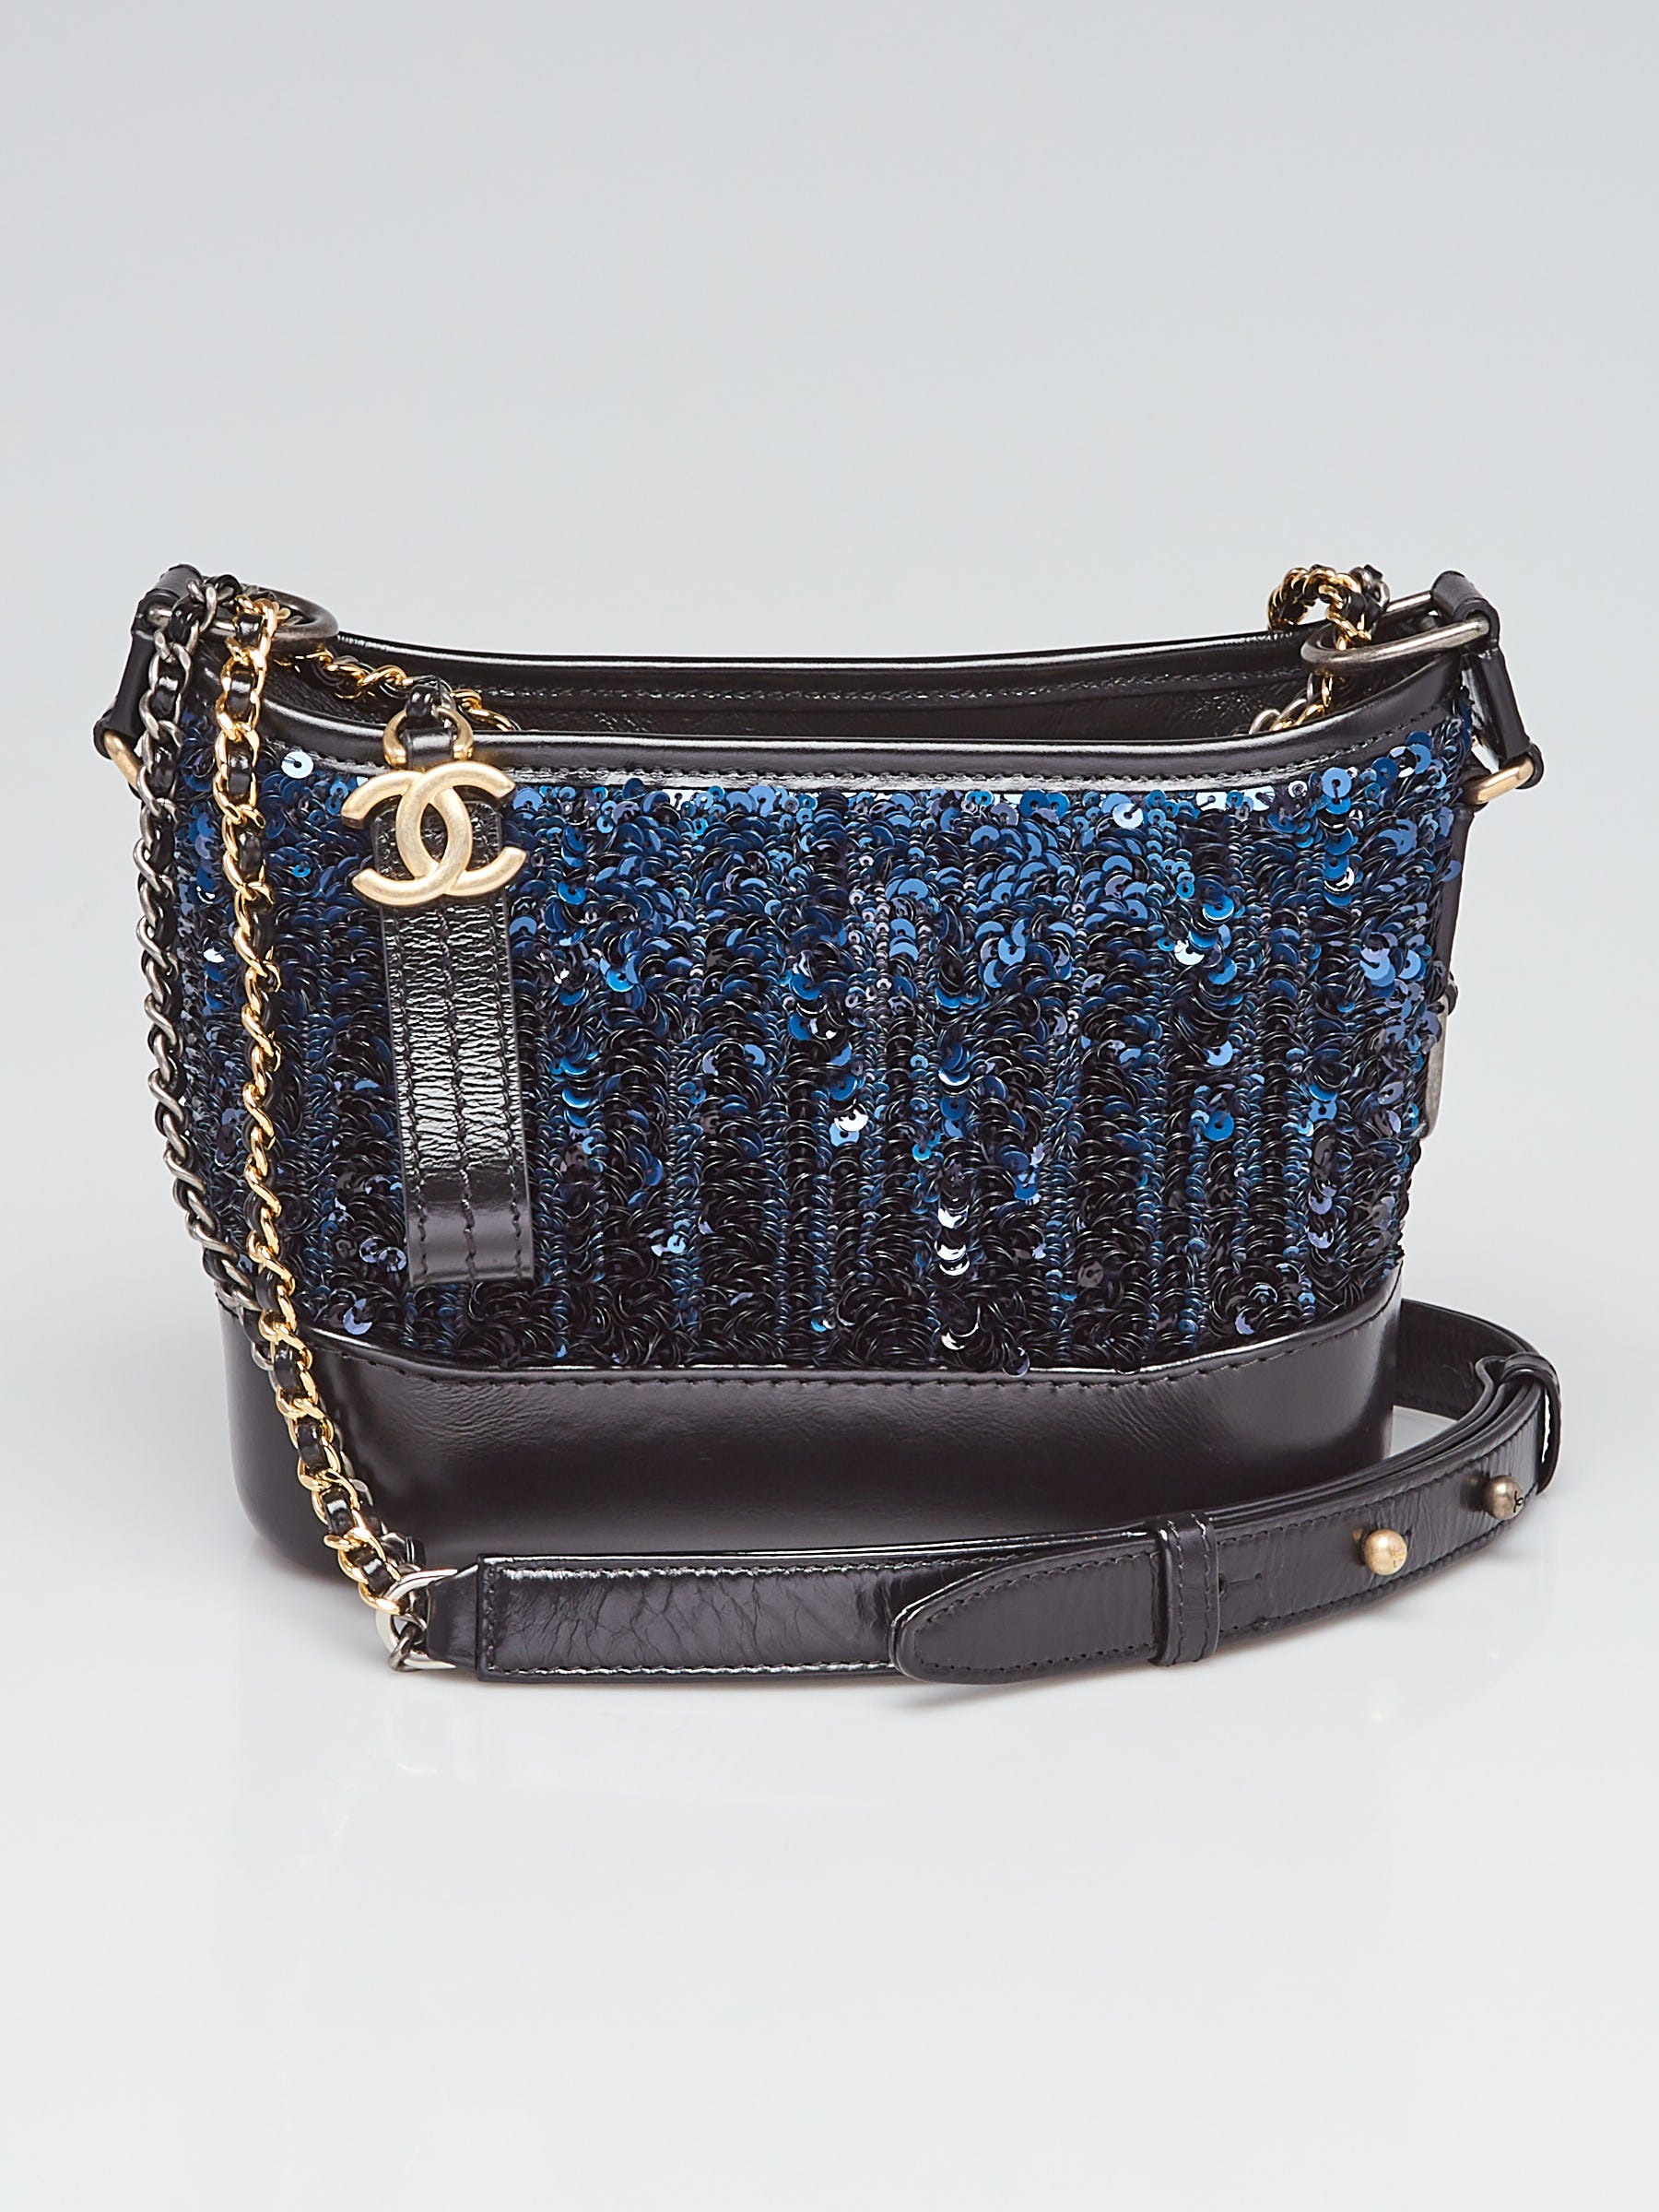 Chanel Small Tweed and Blue Leather Gabrielle